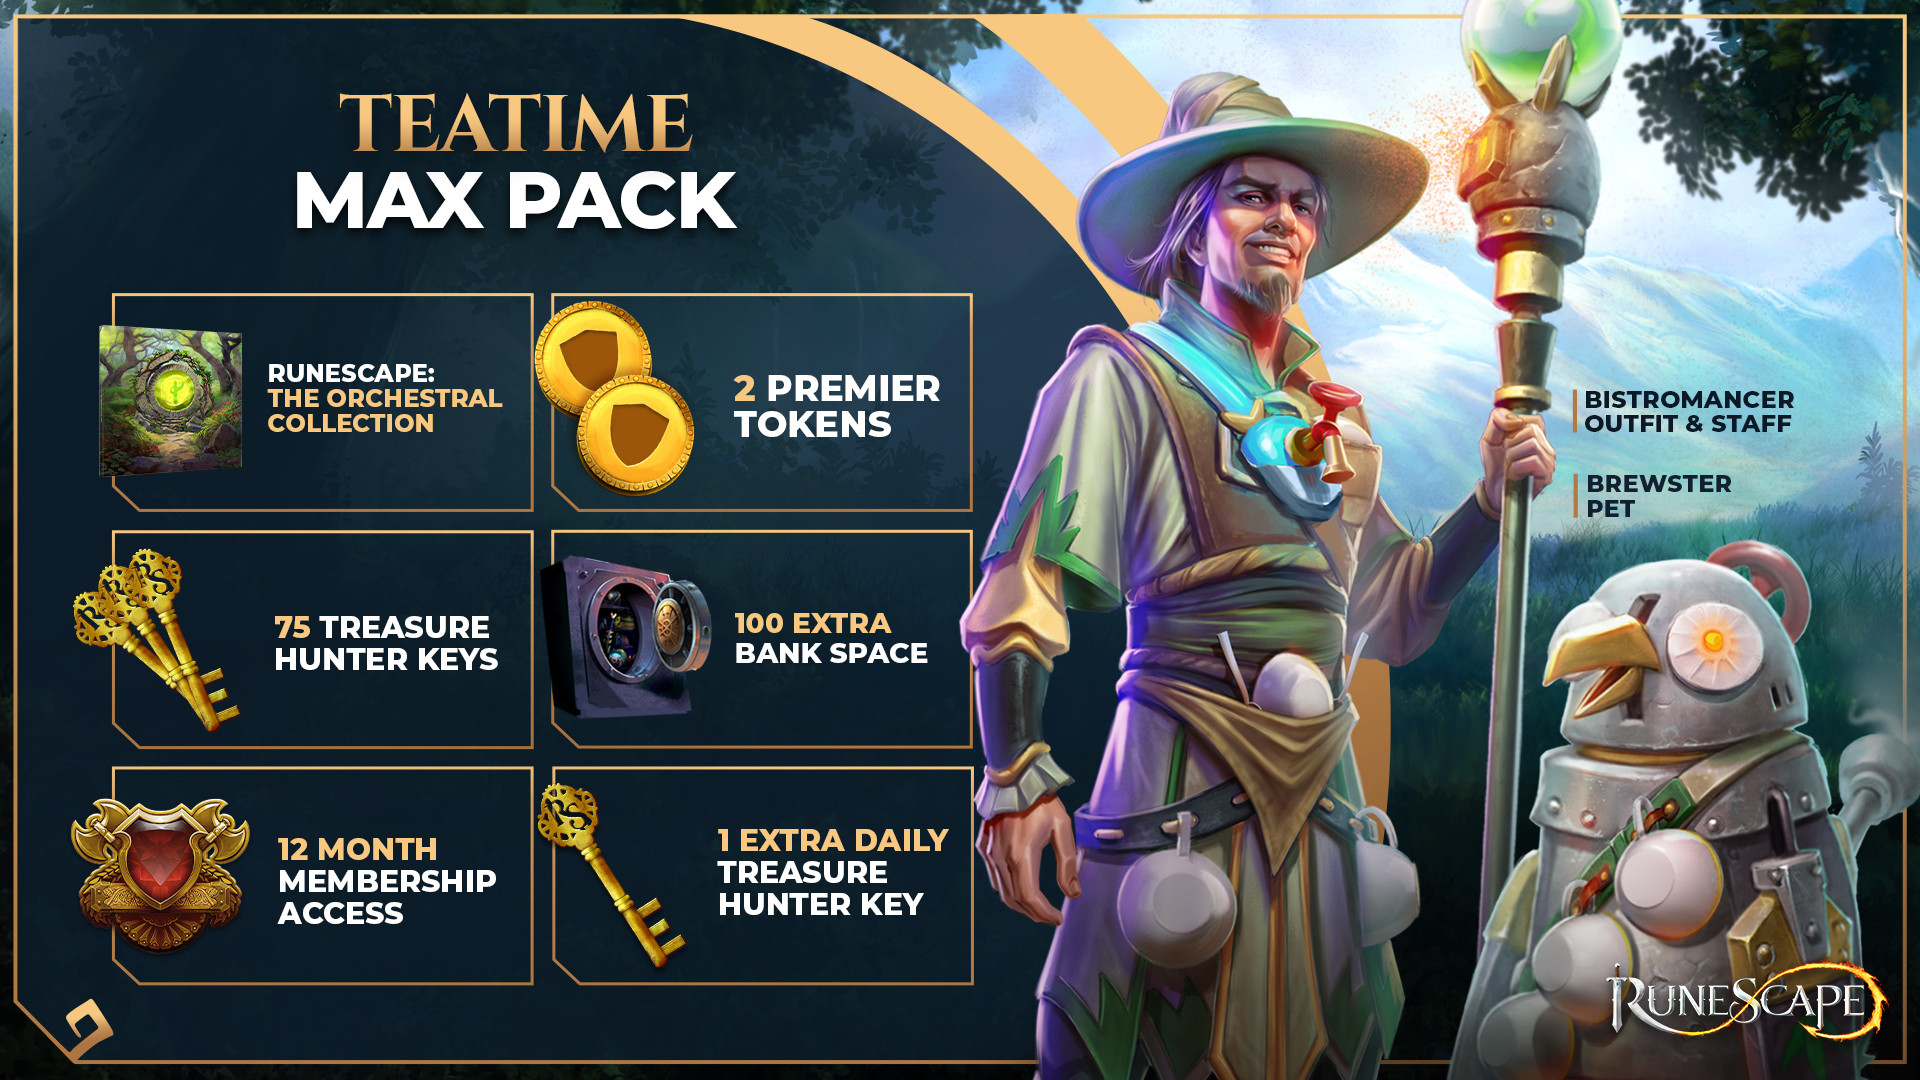 Runescape - Max Pack + 12 Months Membership Manual Delivery